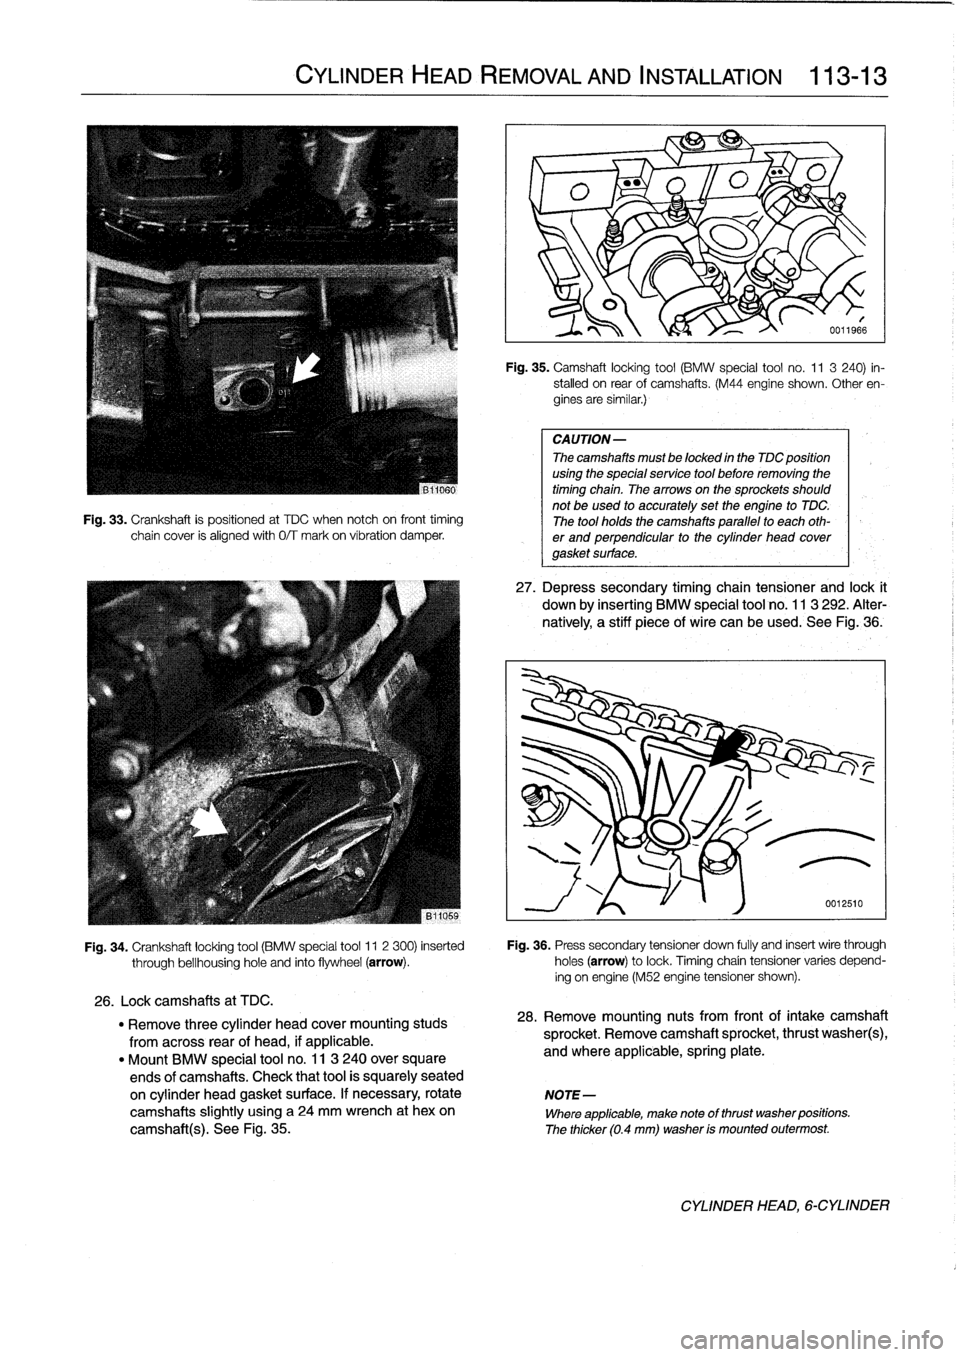 BMW 318i 1997 E36 Owners Guide 
Fig
.
33
.
Crankshaft
is
positioned
at
TDC
when
notch
oh
front
timing
chain
cover
is
alignedwith
0/T
mark
on
víbration
damper
.

CYLINDER
HEAD
REMOVAL
AND
INSTALLATION

	

113-
1
3

Fig
.
35
.
Camsh